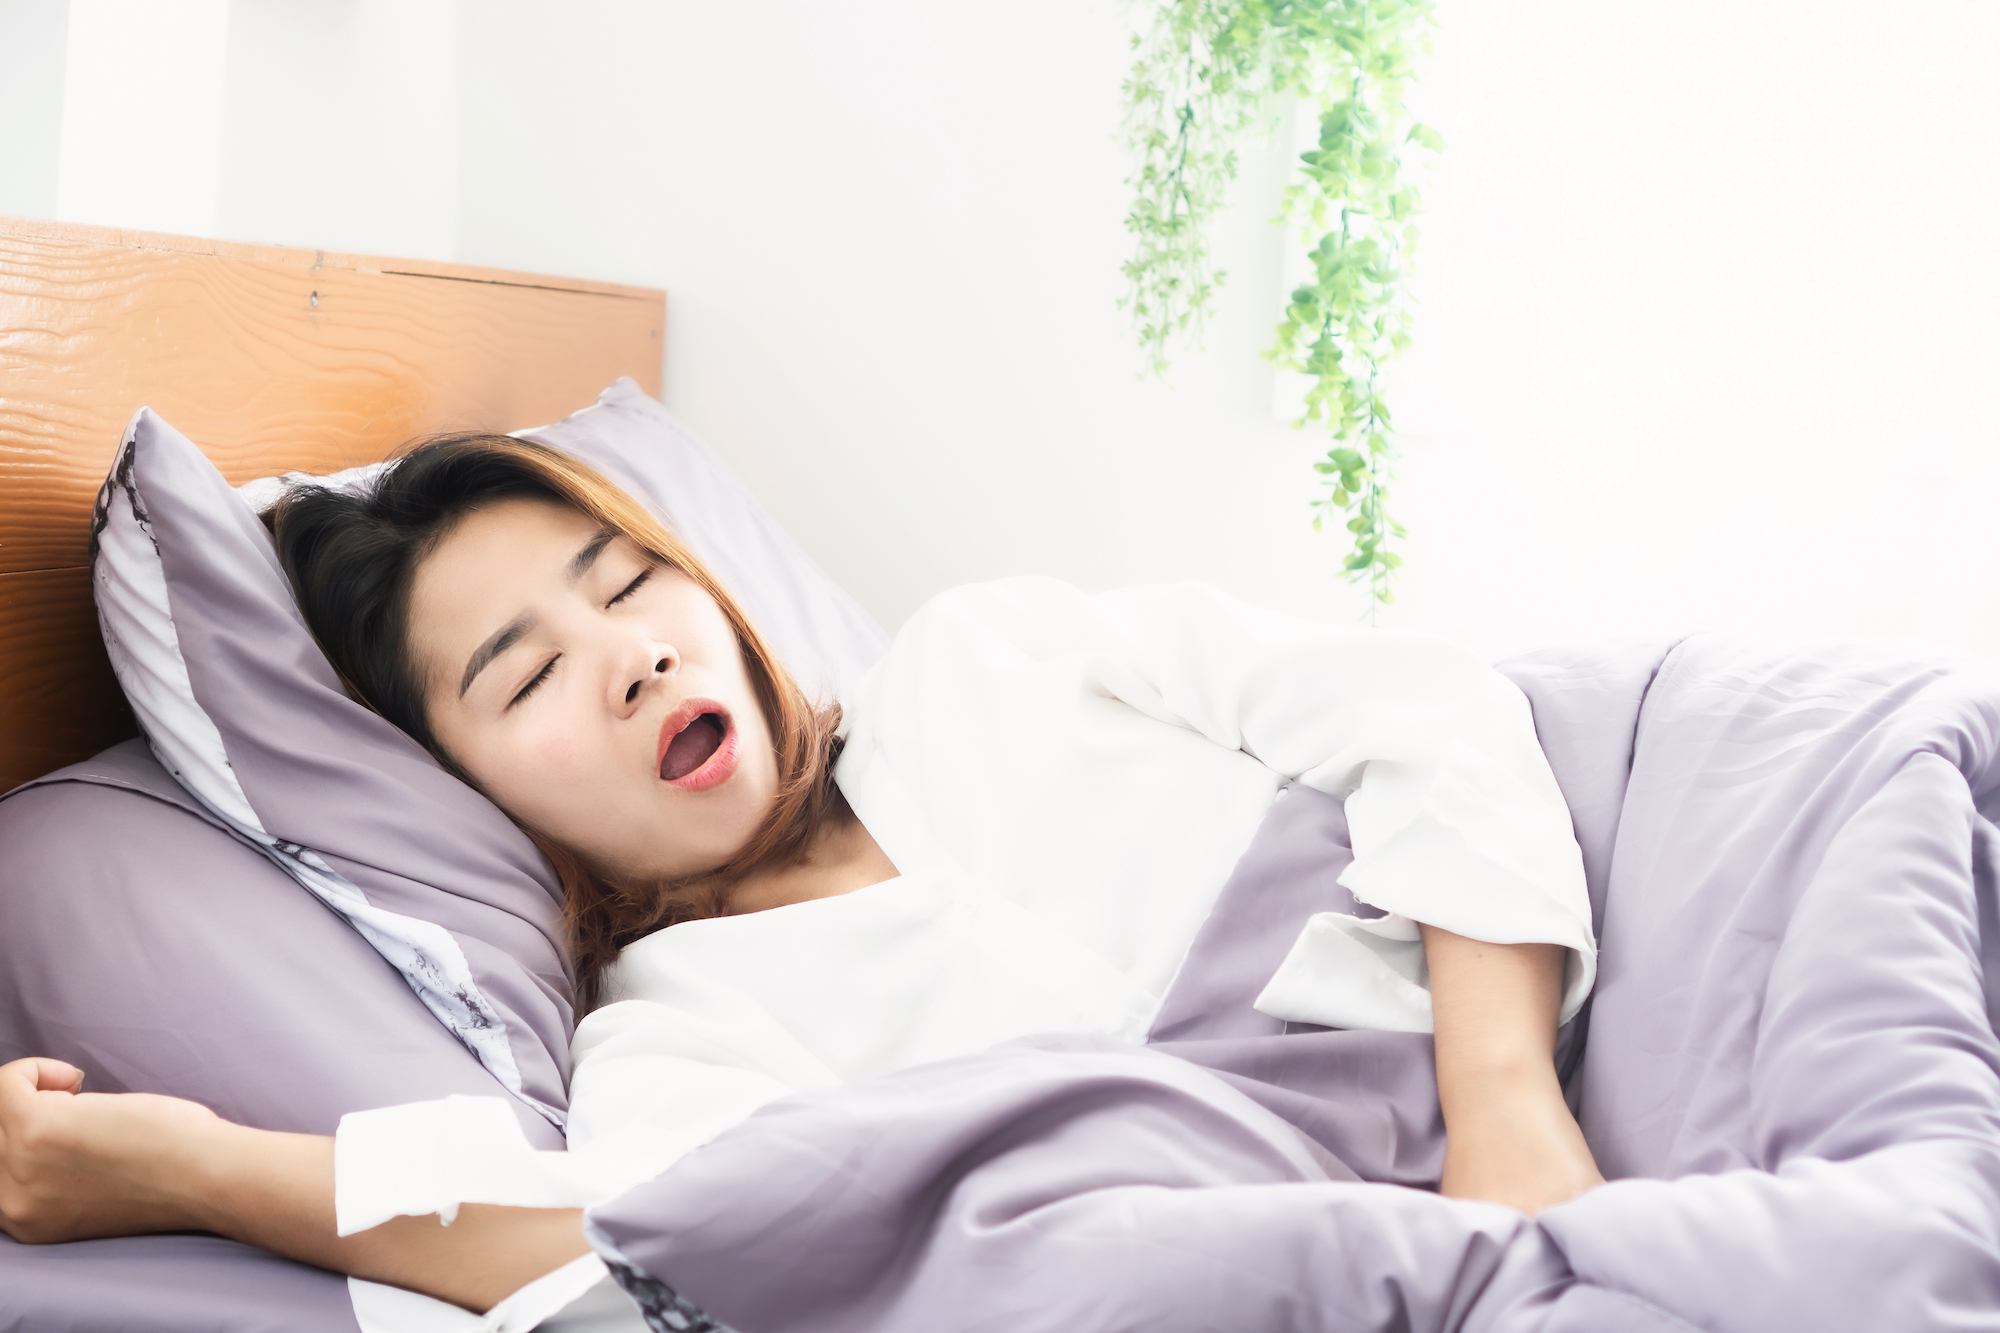 Is Sleeping With Your Mouth Open Bad For Your Teeth?